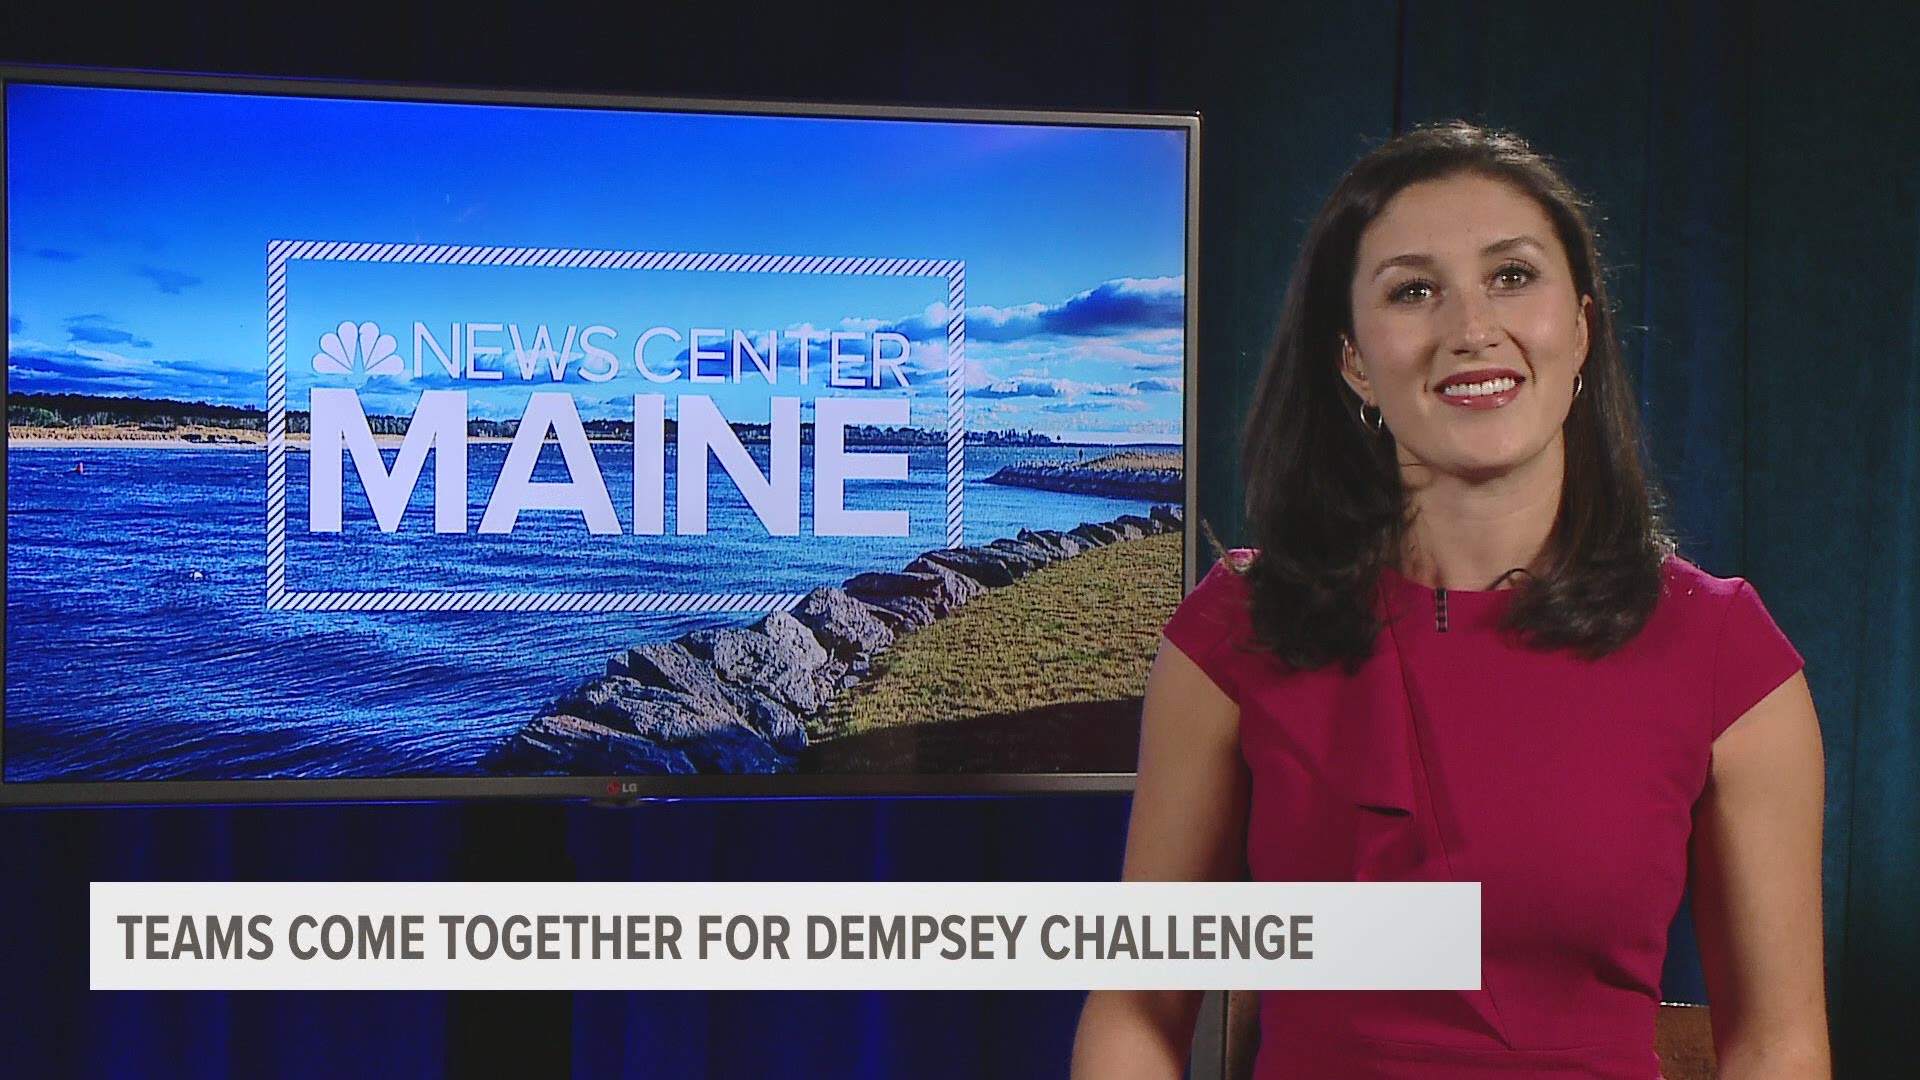 People from around the State came together "virtually" this weekend for the Dempsey Challenge.